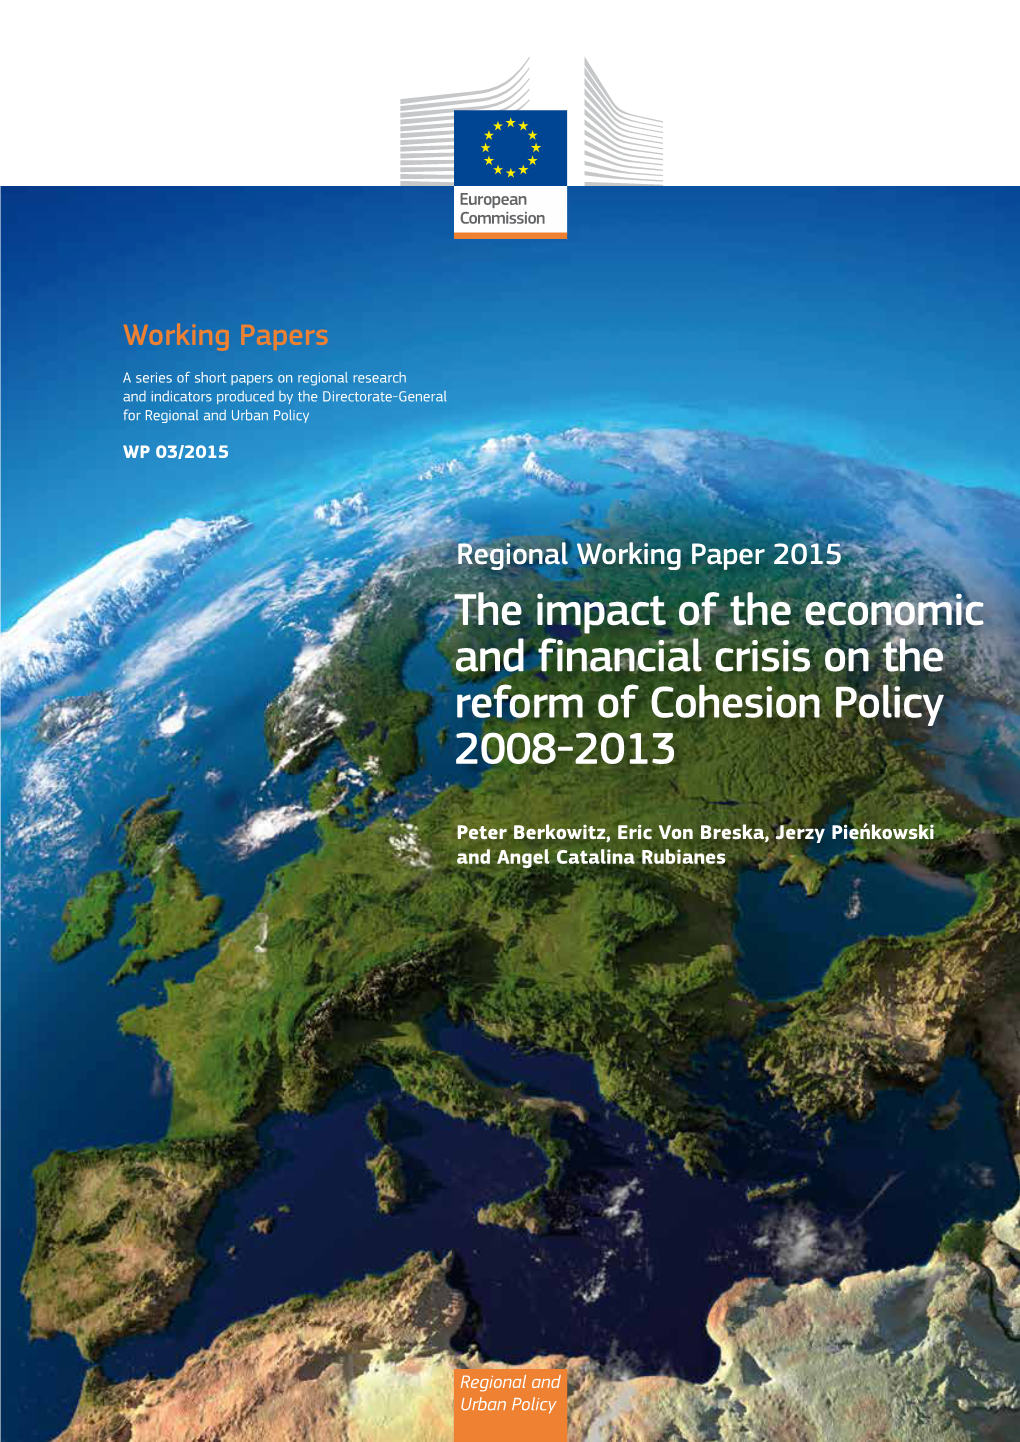 The Impact of the Economic and Financial Crisis on the Reform of Cohesion Policy 2008-2013